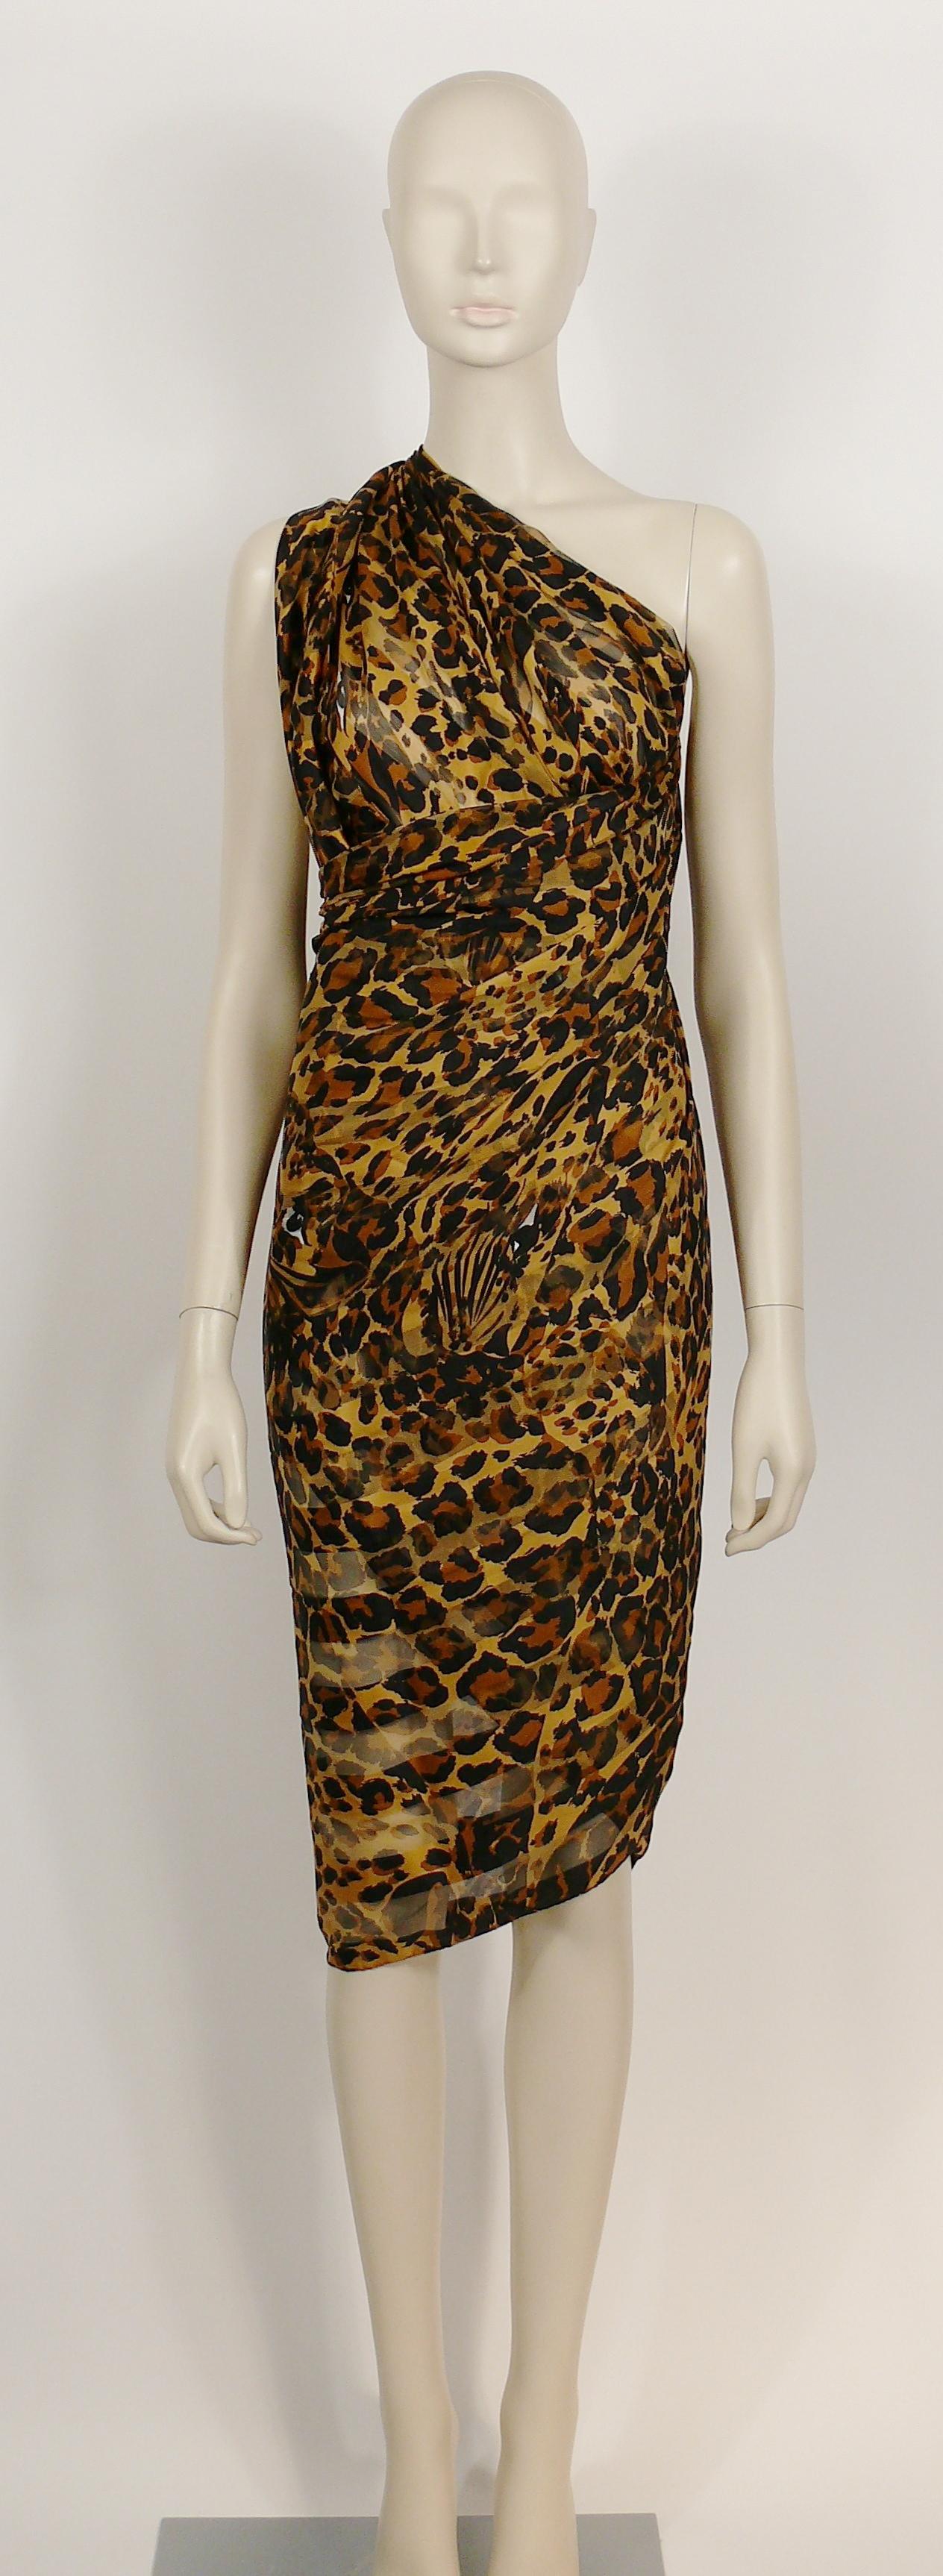 Yves Saint Laurent YSL Vintage Iconic Leopard Striped Sheer Print Stole For Sale 1